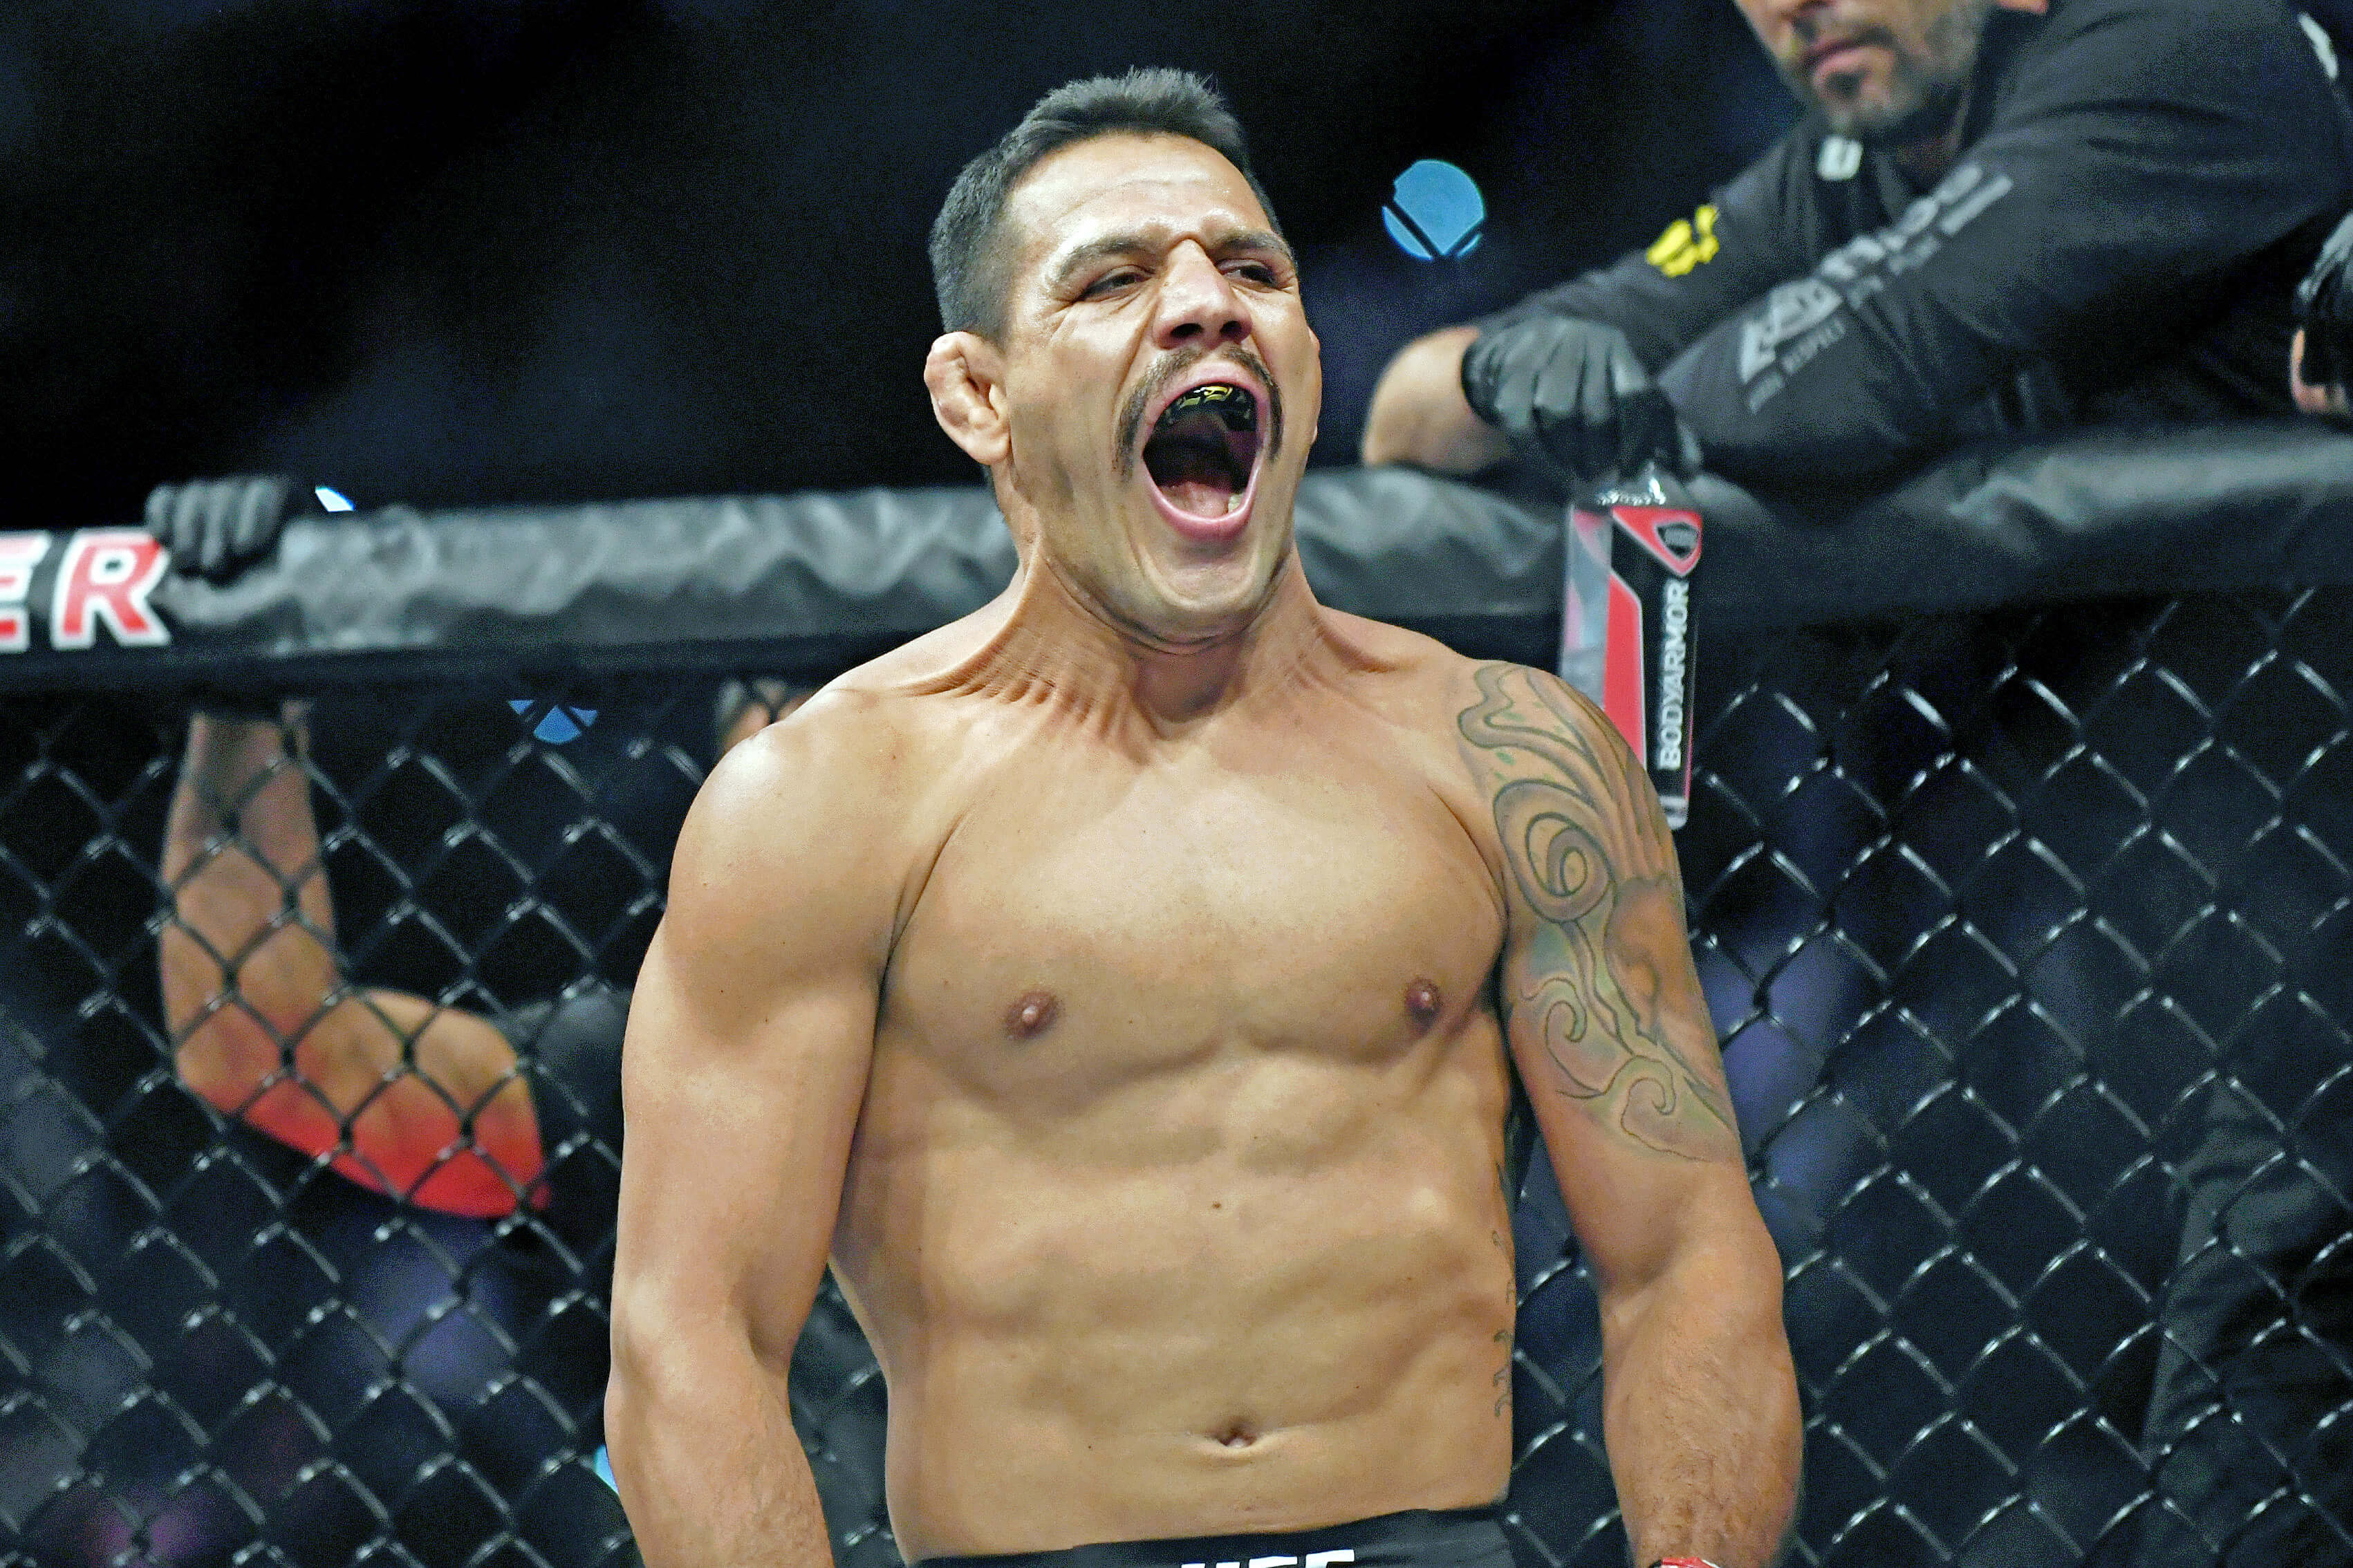 How To Bet - UFC Fight Night Barbarena vs Dos Anjos Picks and Predictions: Age Ain't Nothing But a Number